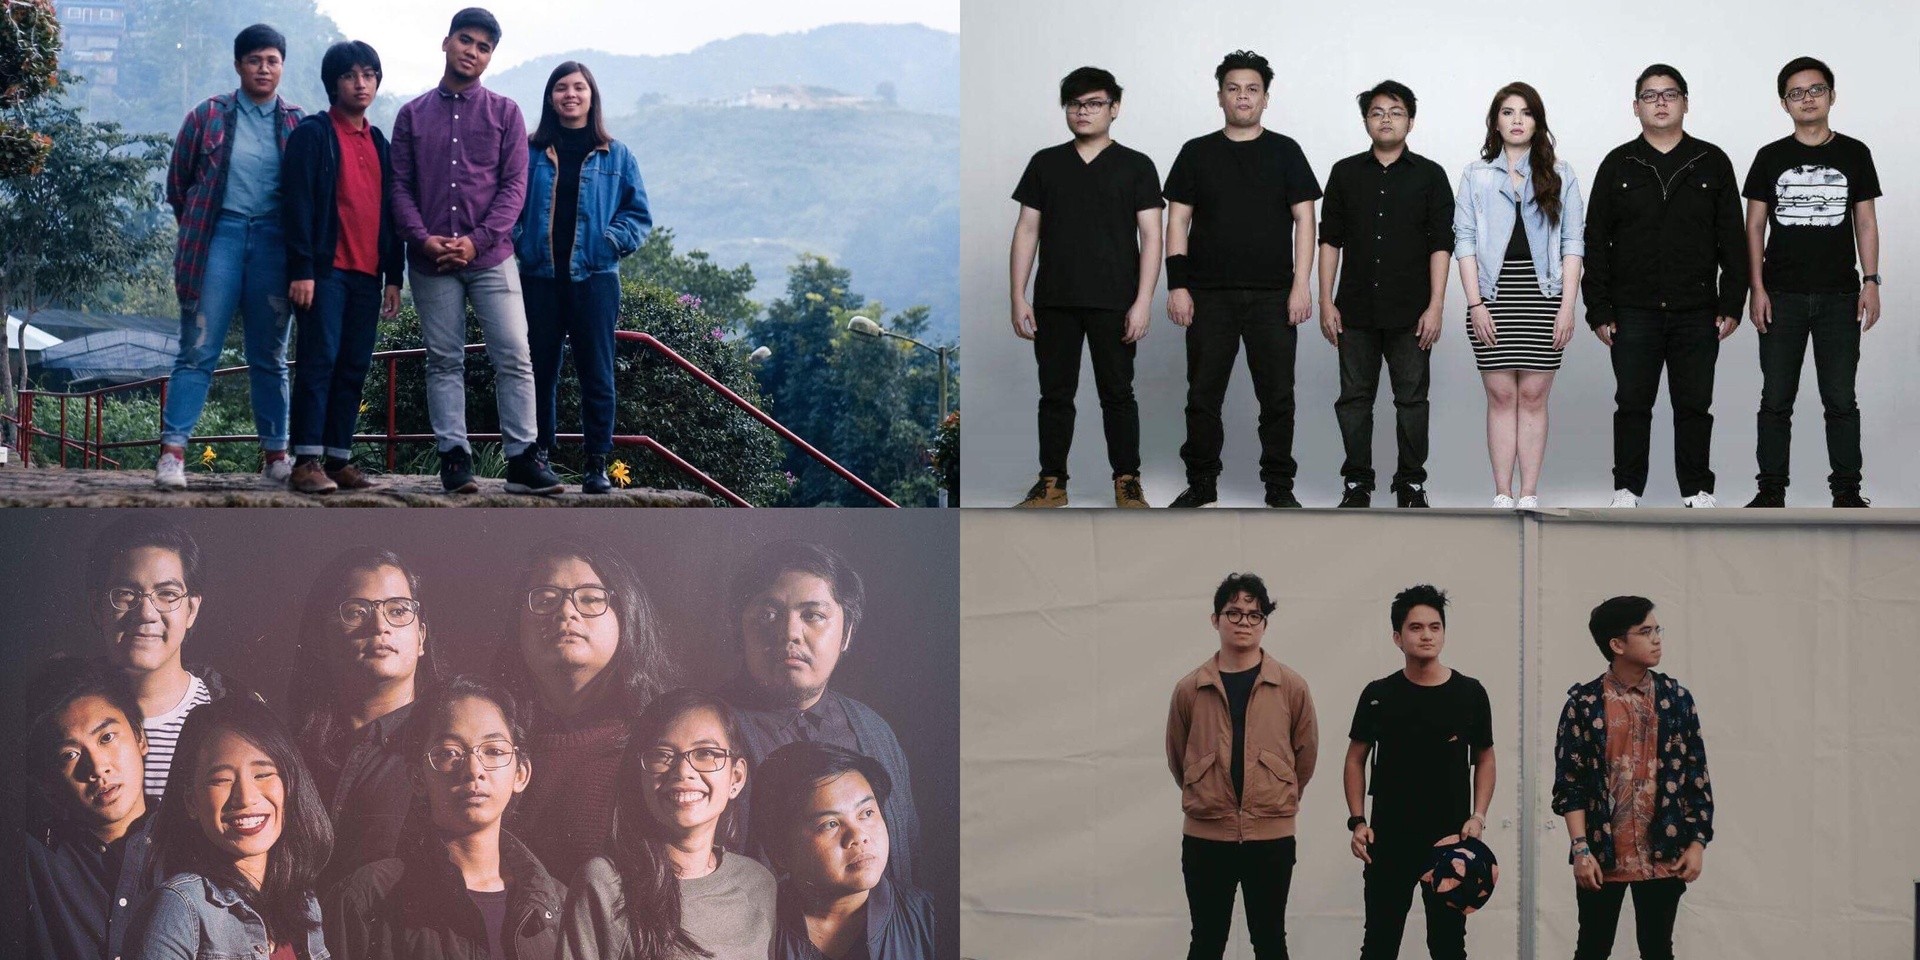 Tagaytay Art Beat unveils Phase 1 line-up – Ben&Ben, Tom's Story, and more